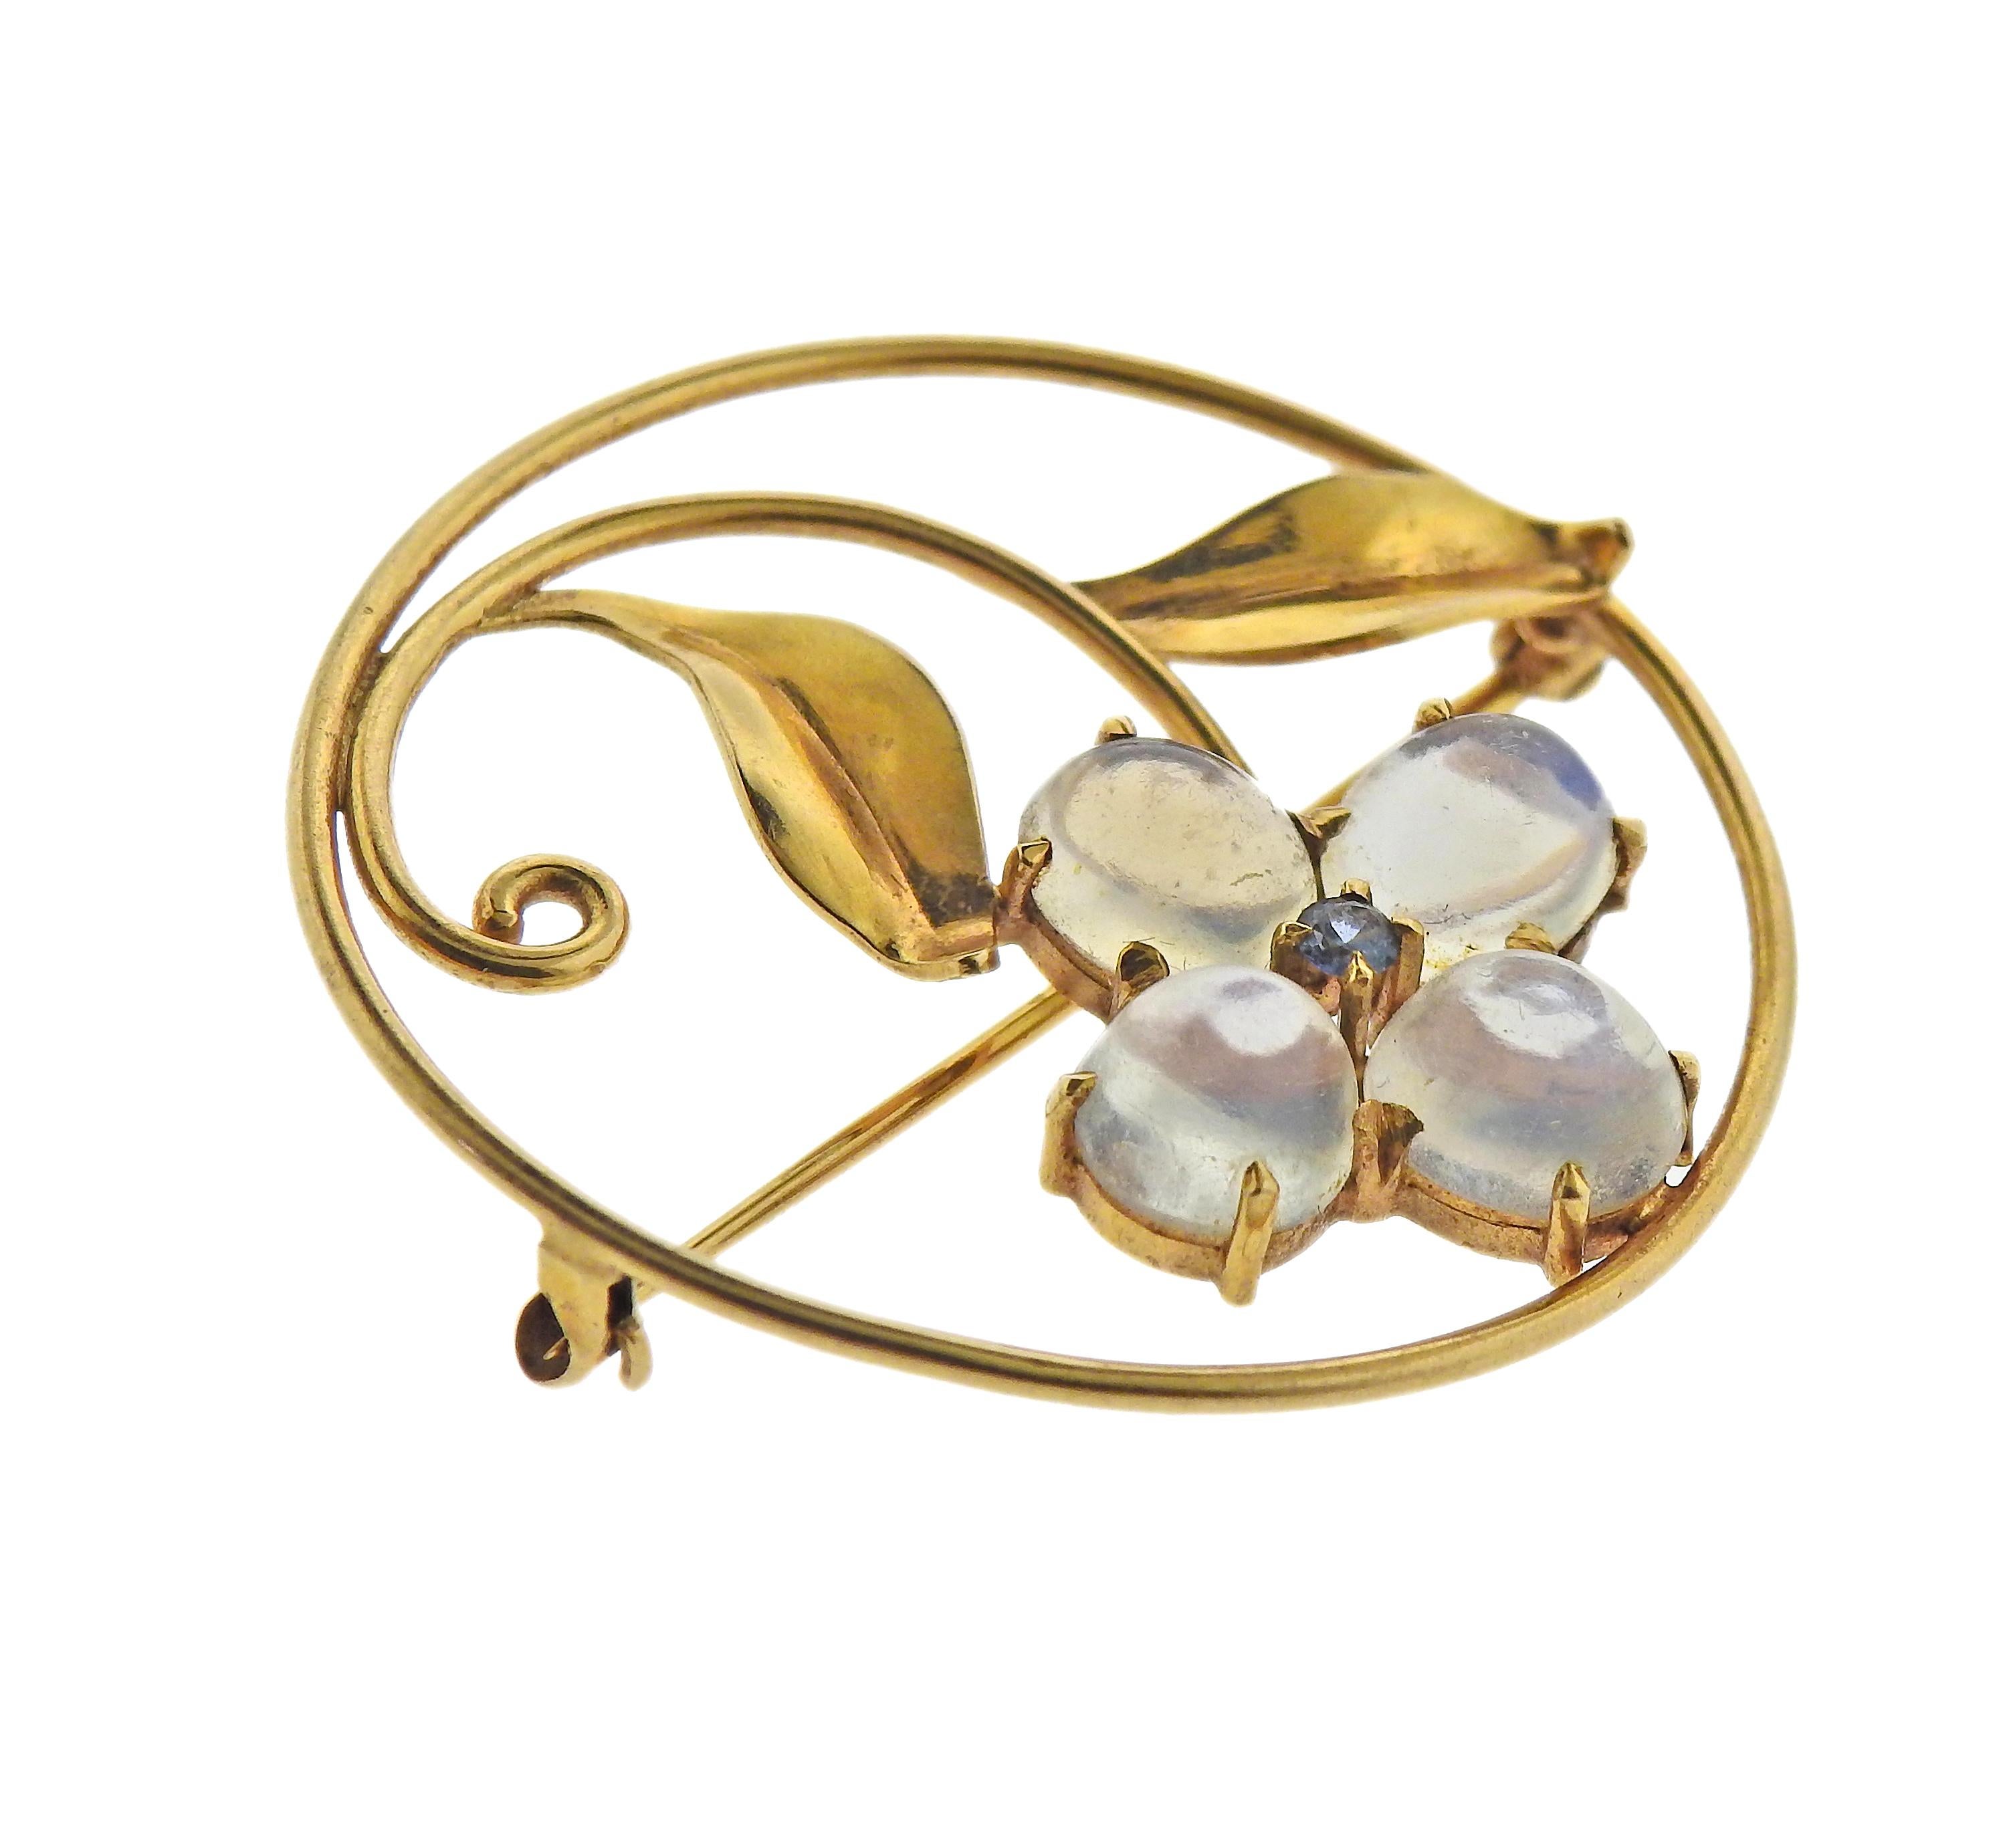 Classic Retro 14k gold circle brooch, depicting a flower, set with 4 moonstone cabochons and a blue gemstone. Brooch is 37mm in diameter. Marked 14k. Weight - 7.3 grams.